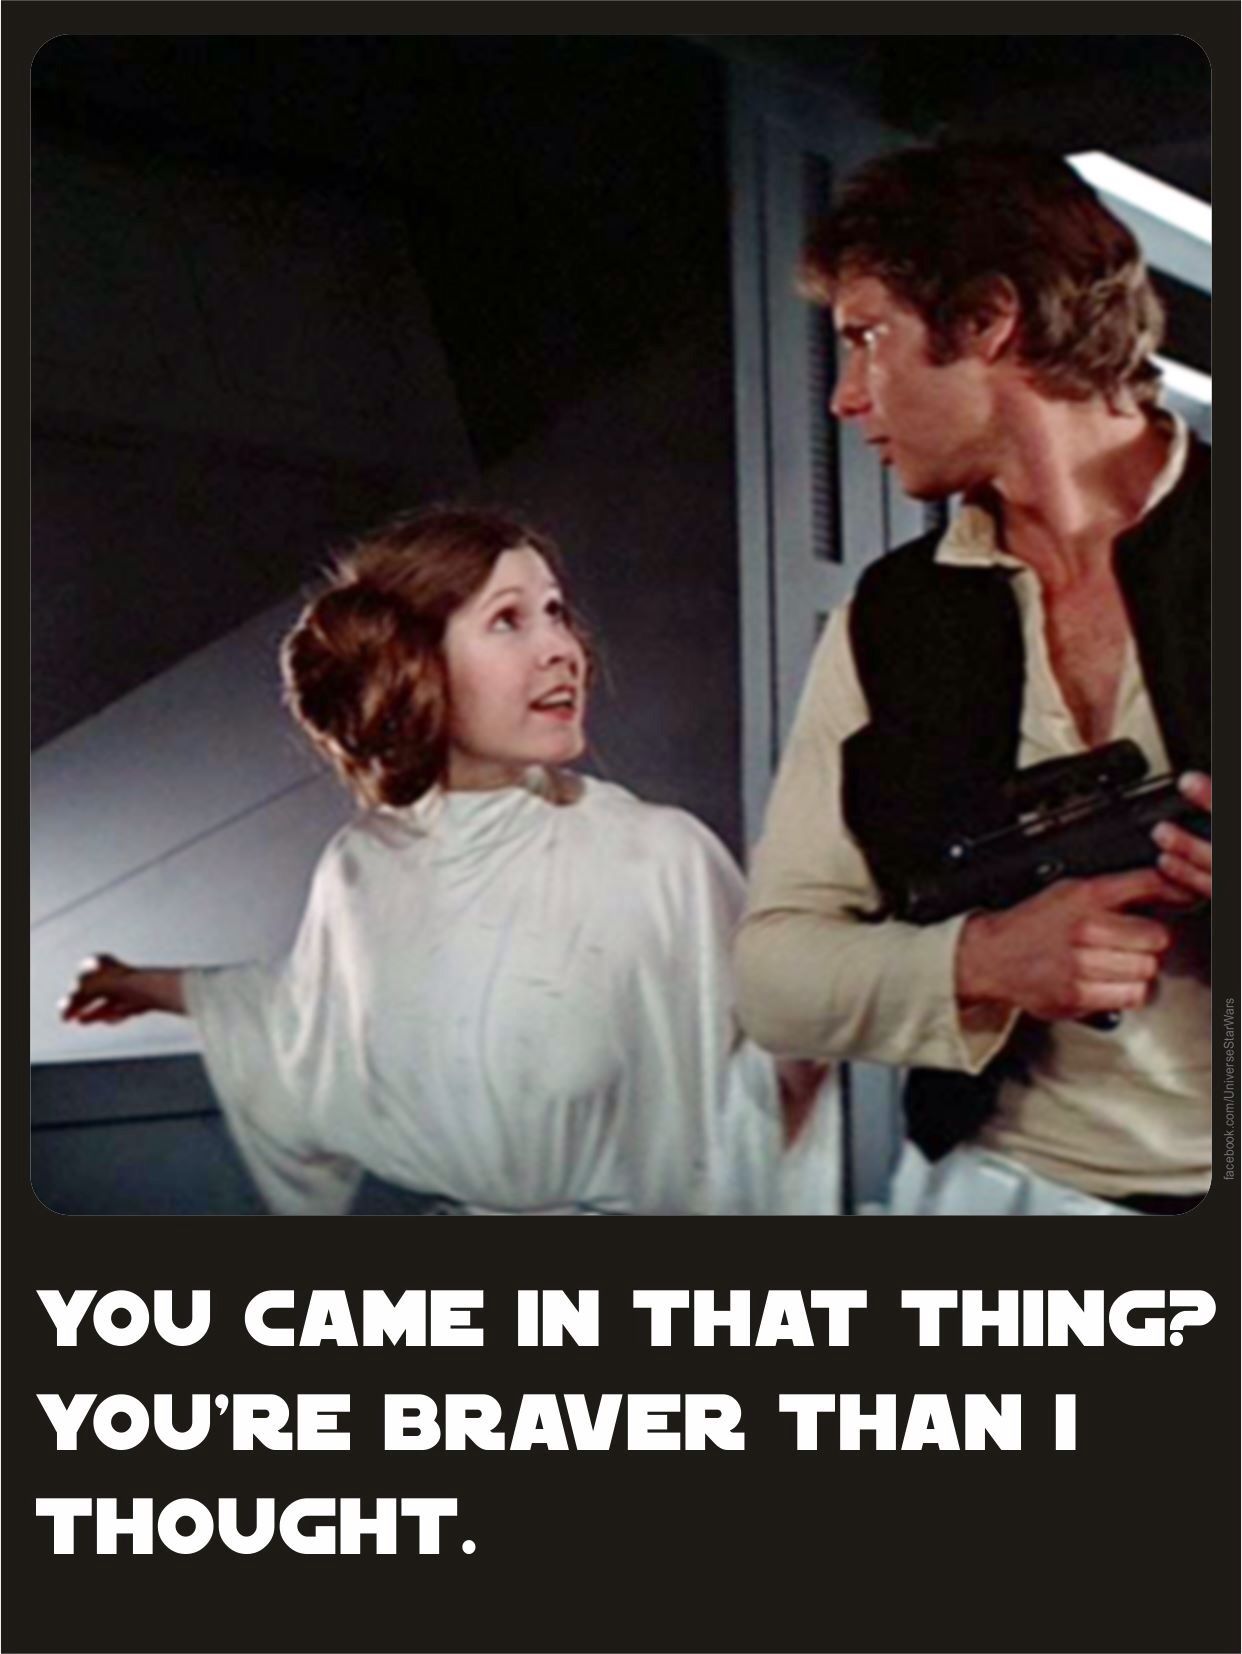 star wars you came in that thing - facebook.comUniverse StarWars You Came In That Thing? You'Re Braver Than I Thought.